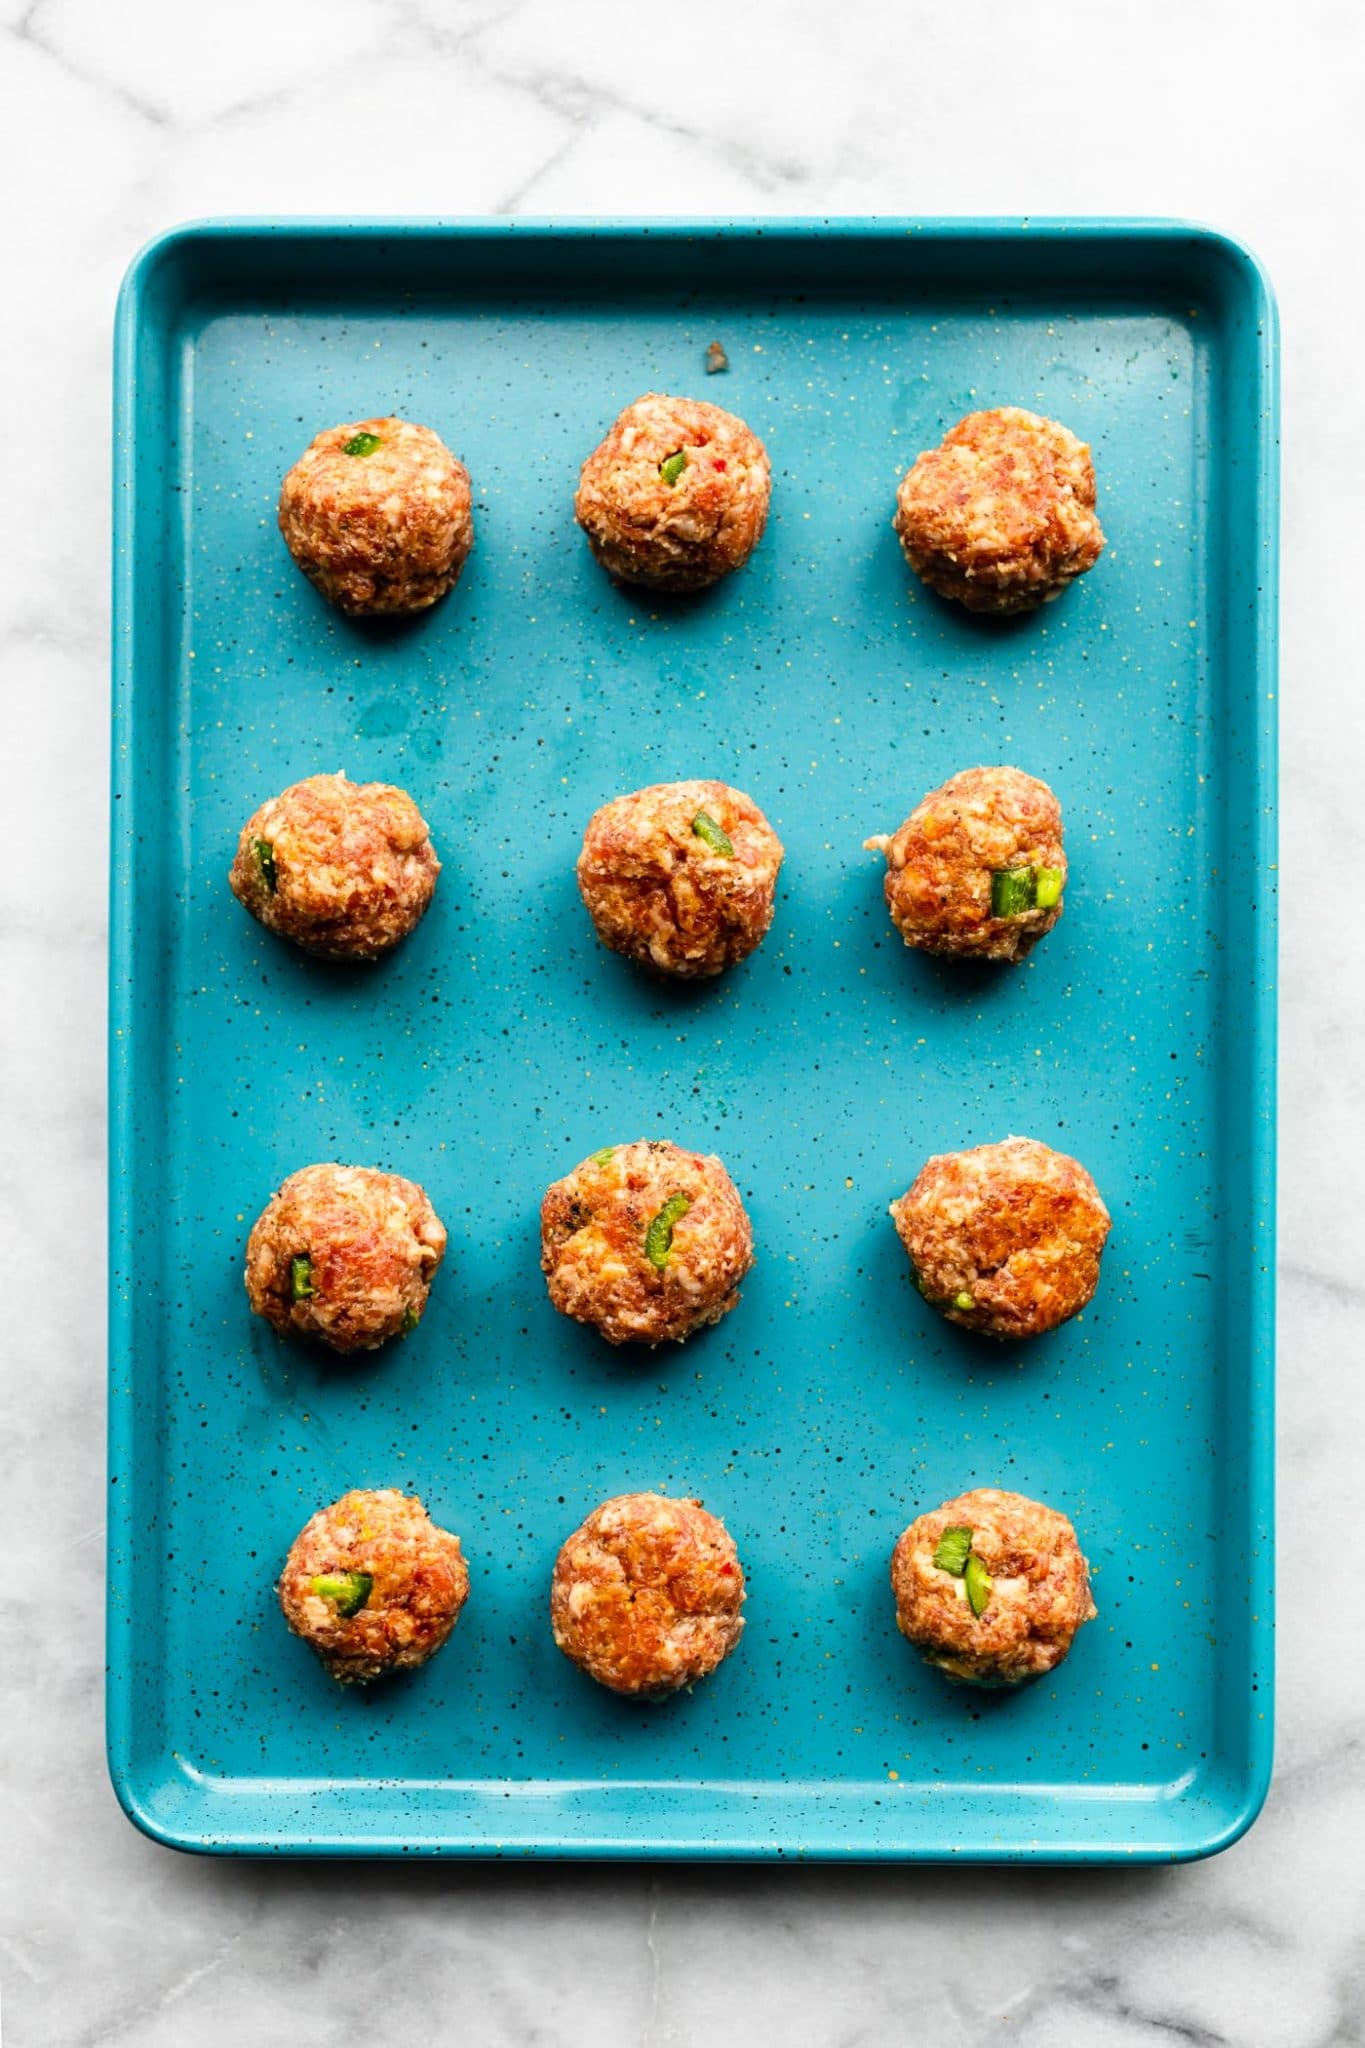 gluten free meatballs lined up on turquoise baking sheet ready to be baked.